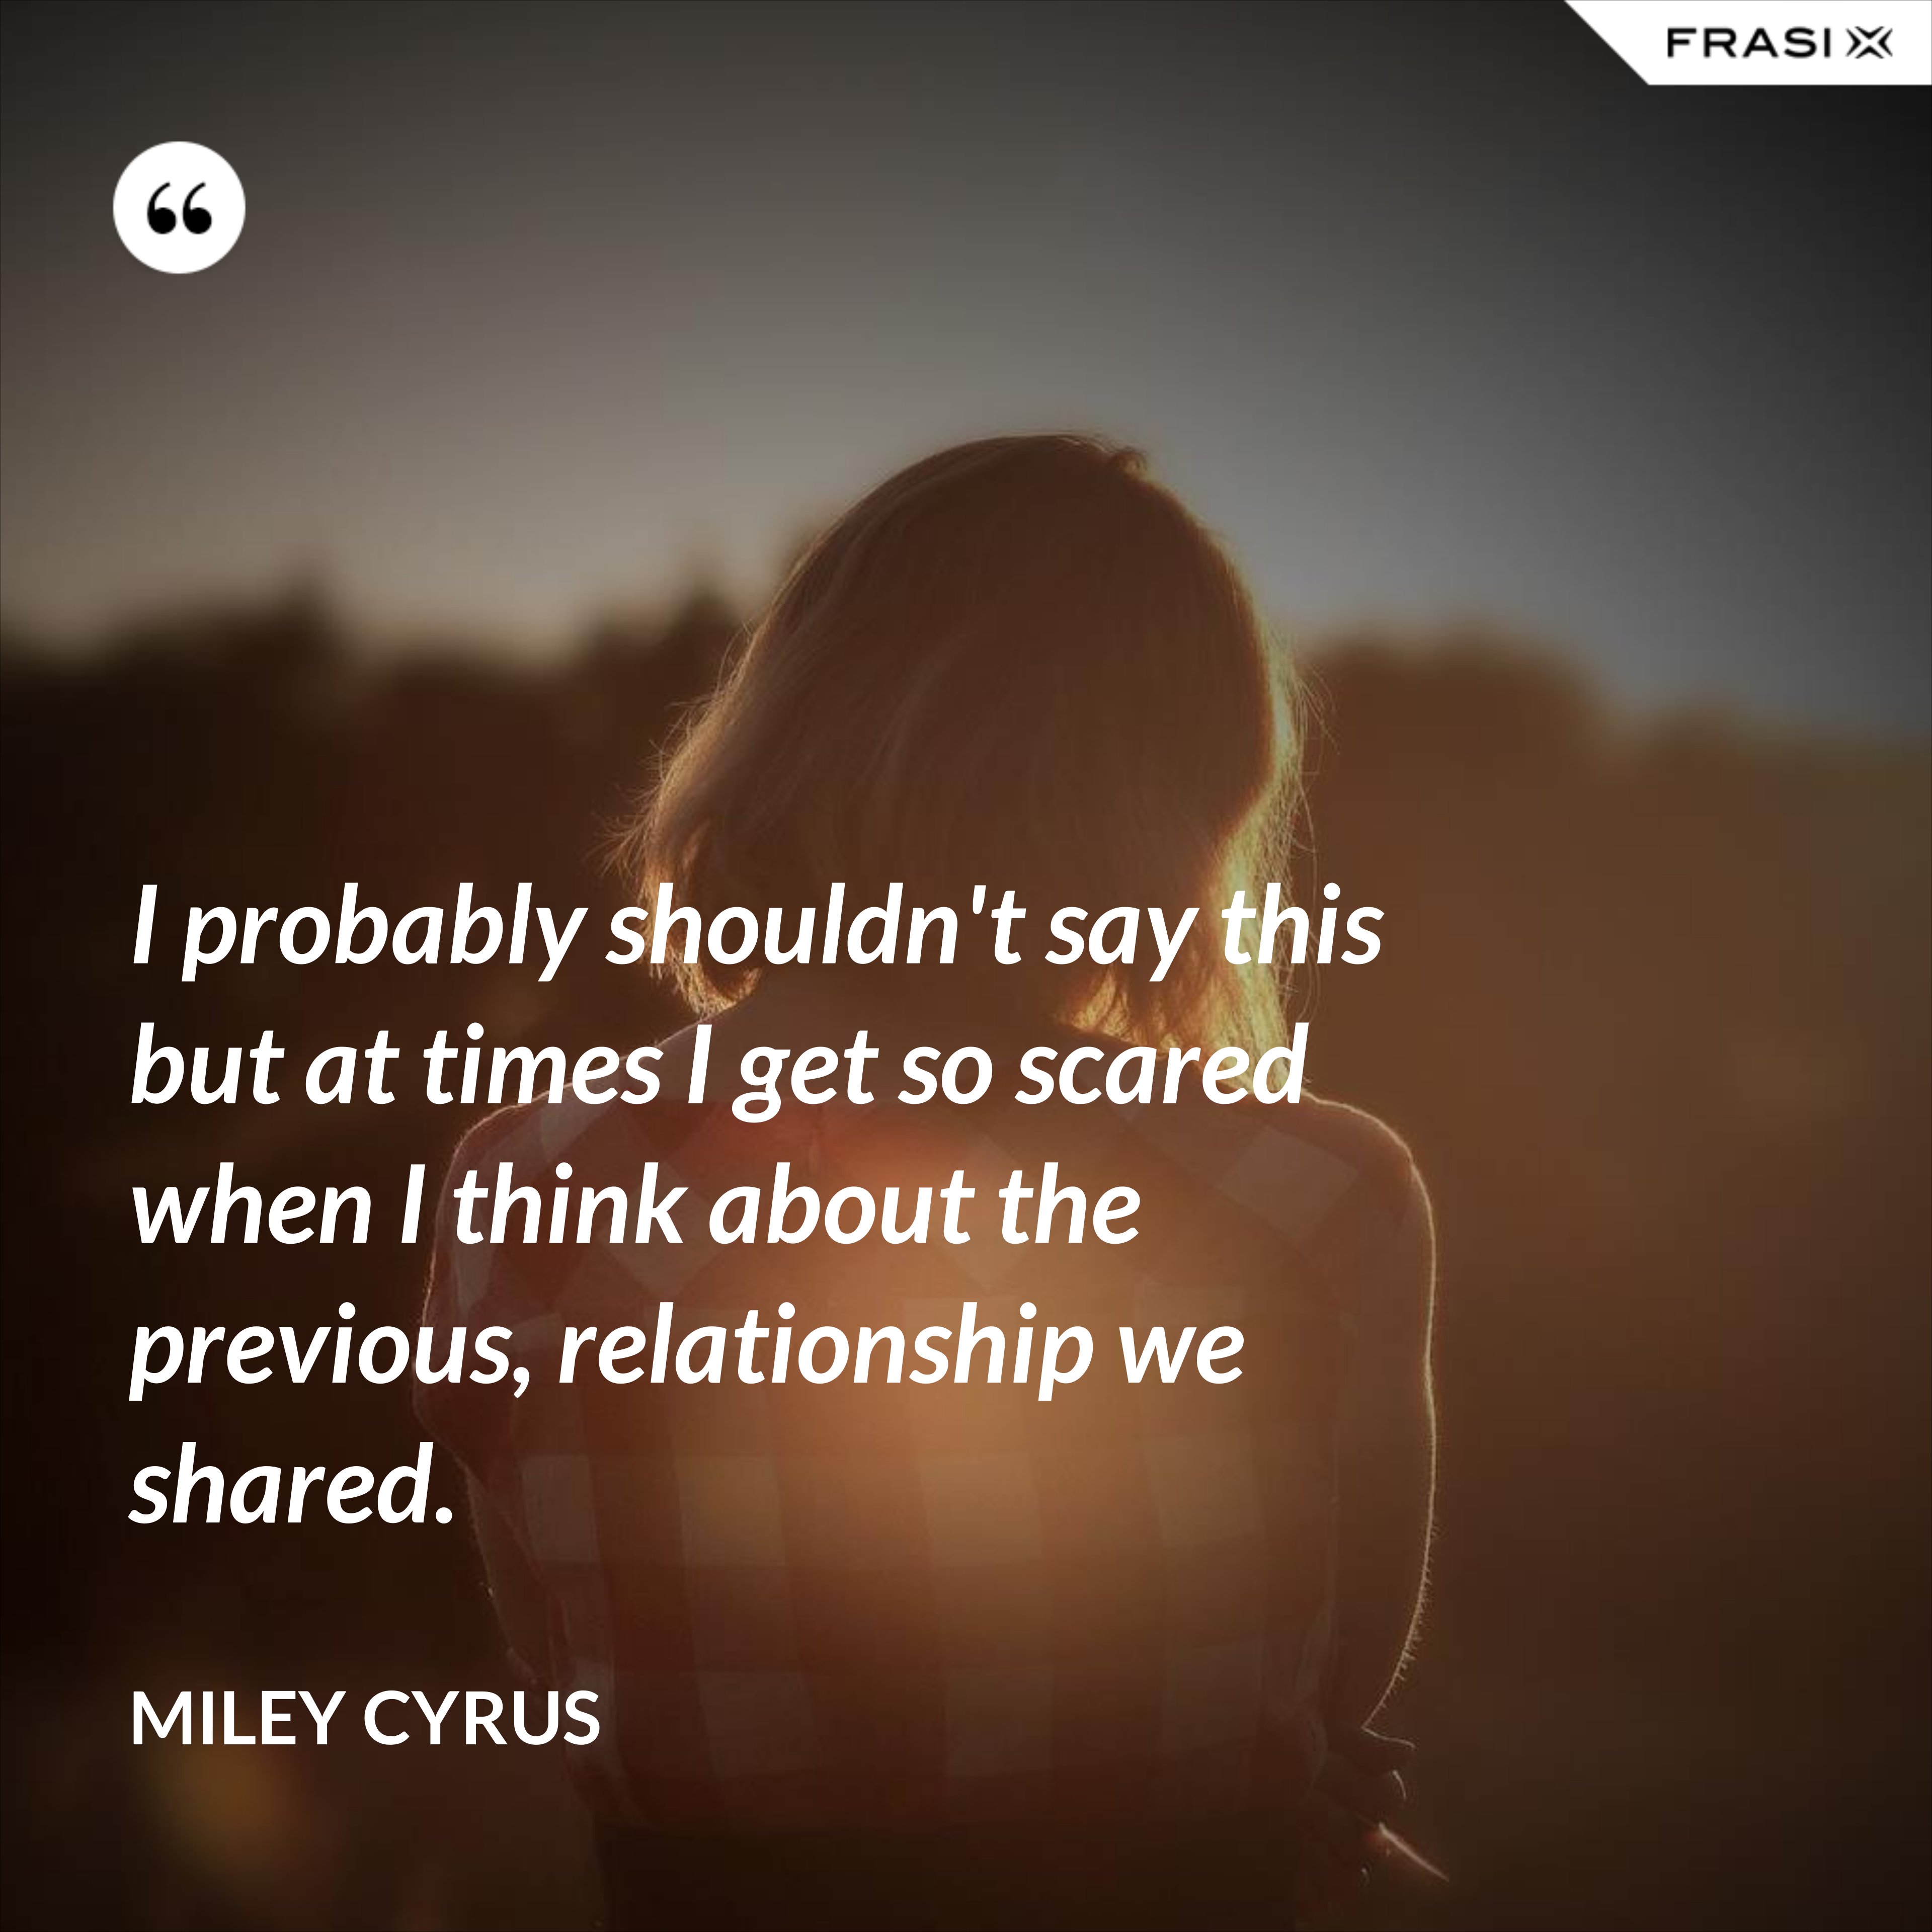 I probably shouldn't say this but at times I get so scared when I think about the previous, relationship we shared. - Miley Cyrus